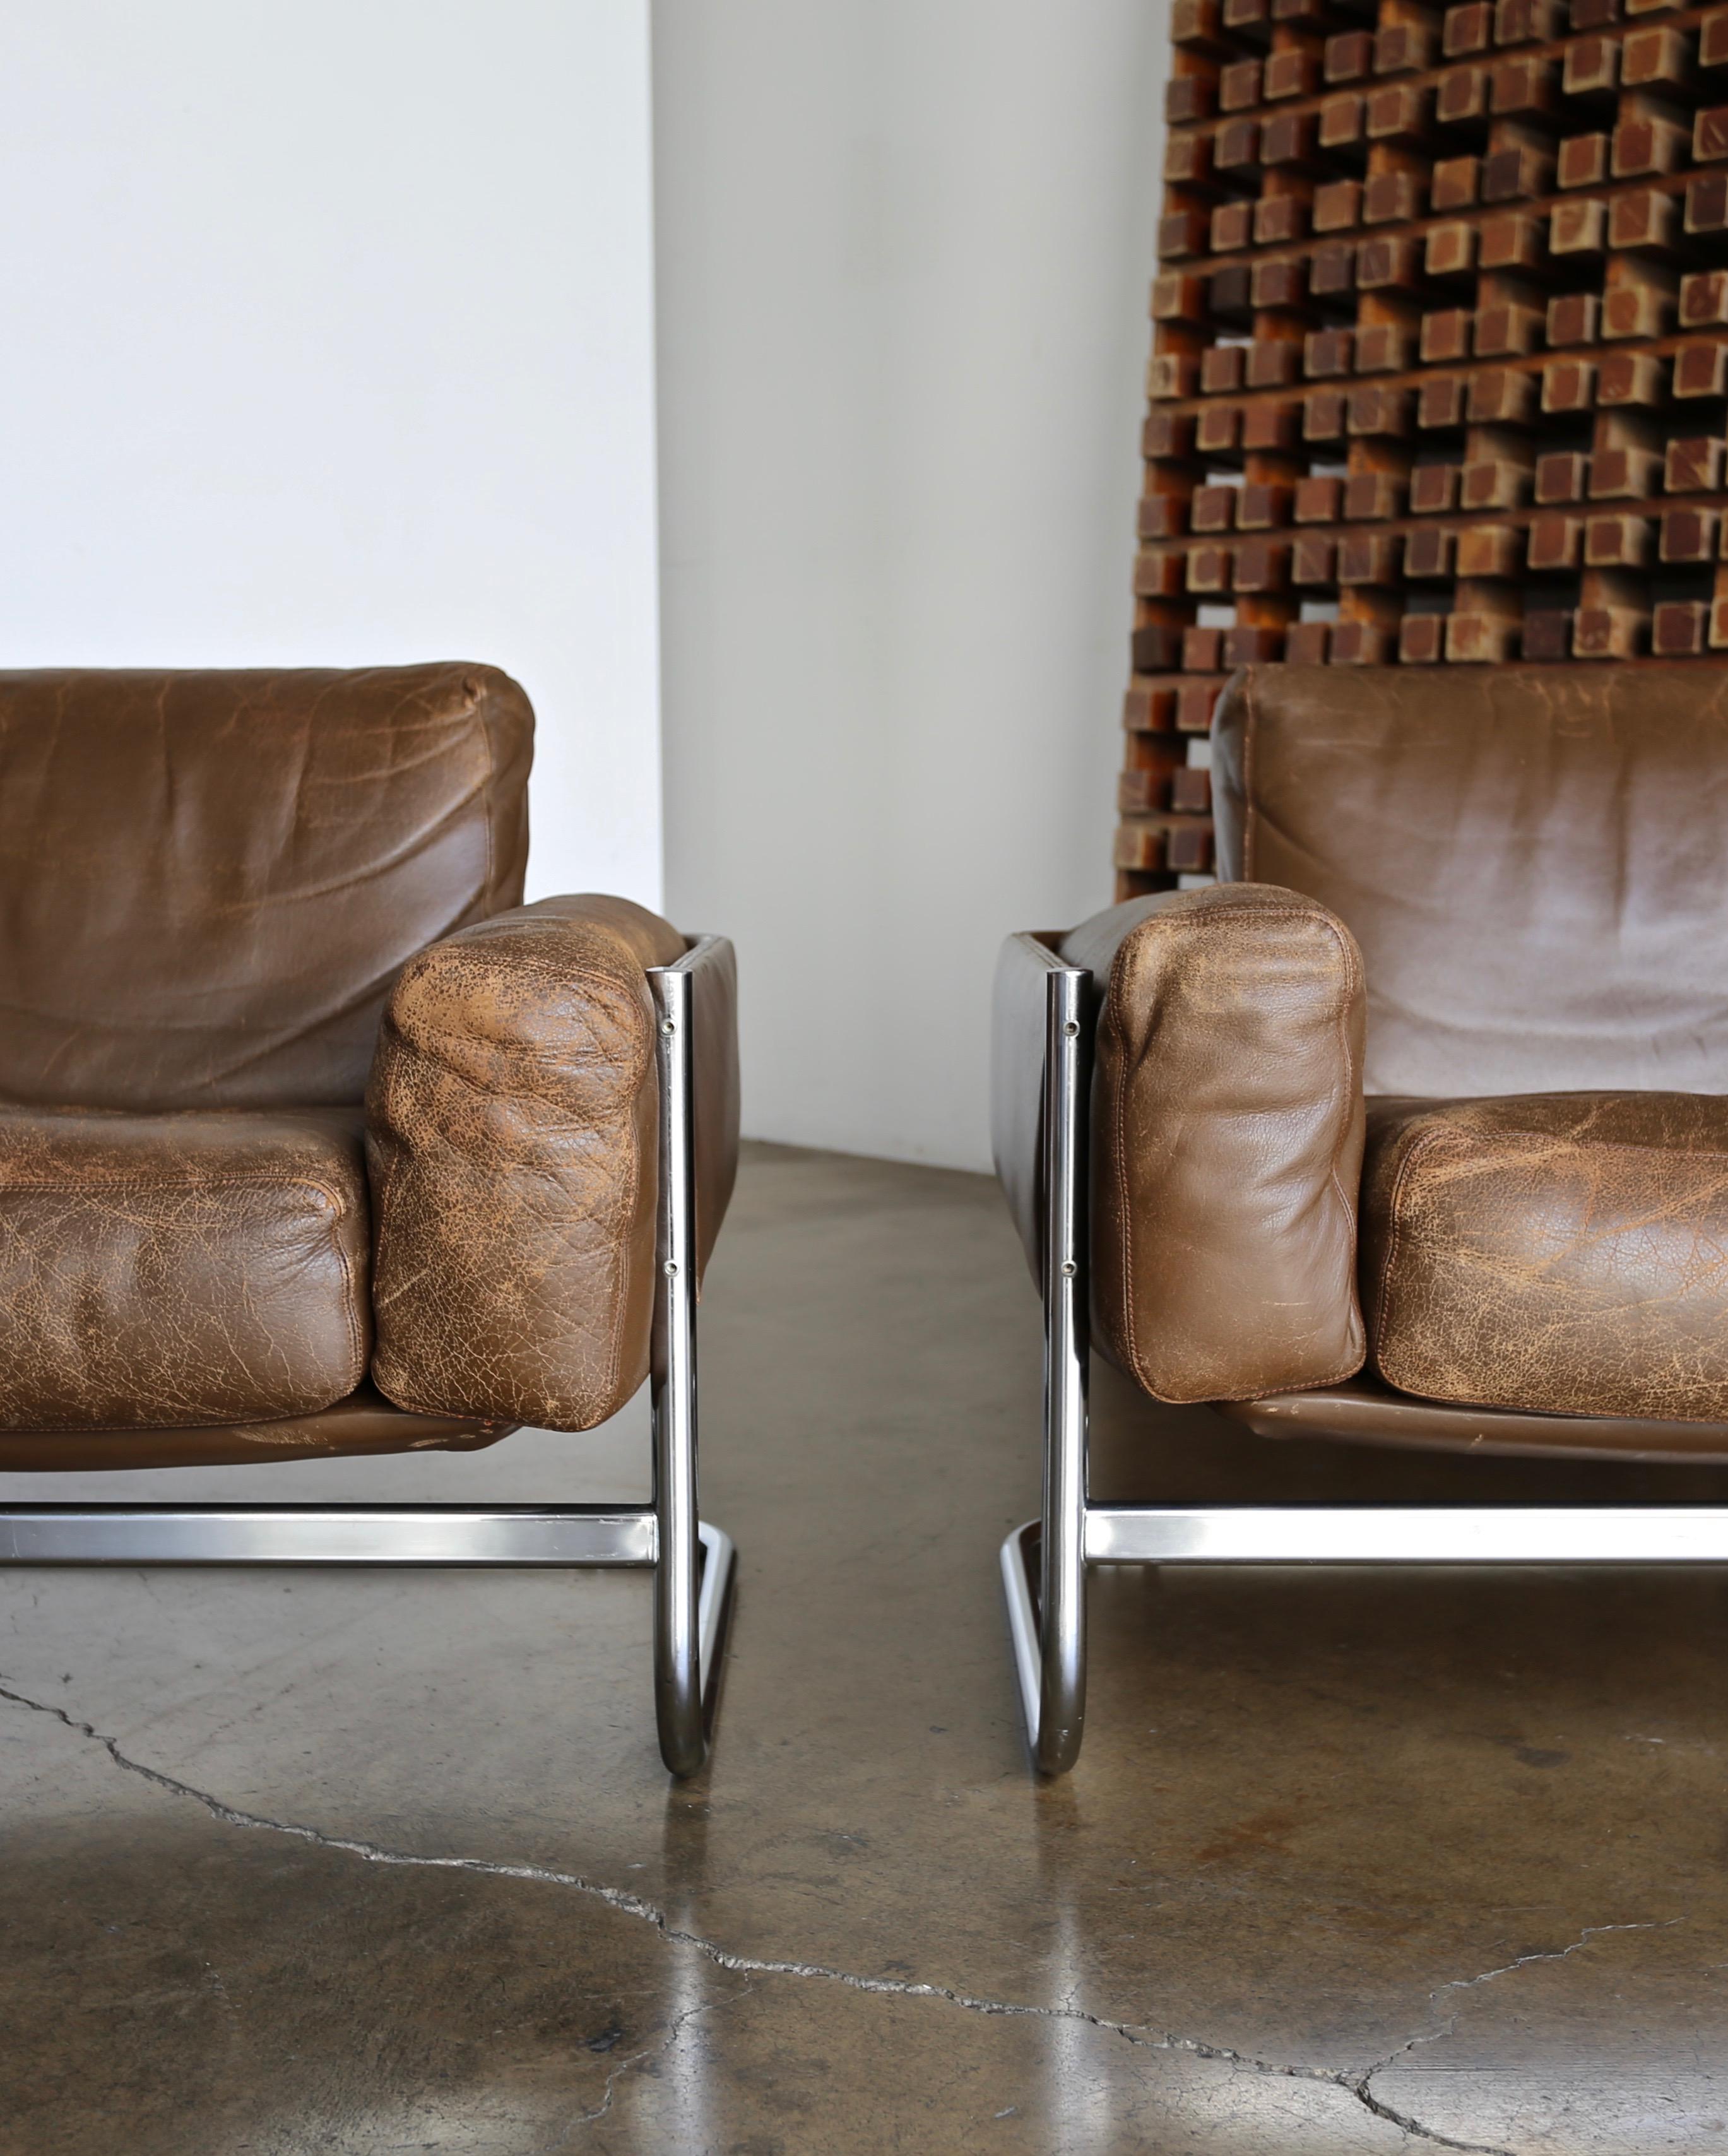 Steel Leather Lounge Chairs by Sven Ivar Dysthe for Dokka Mobler Norway